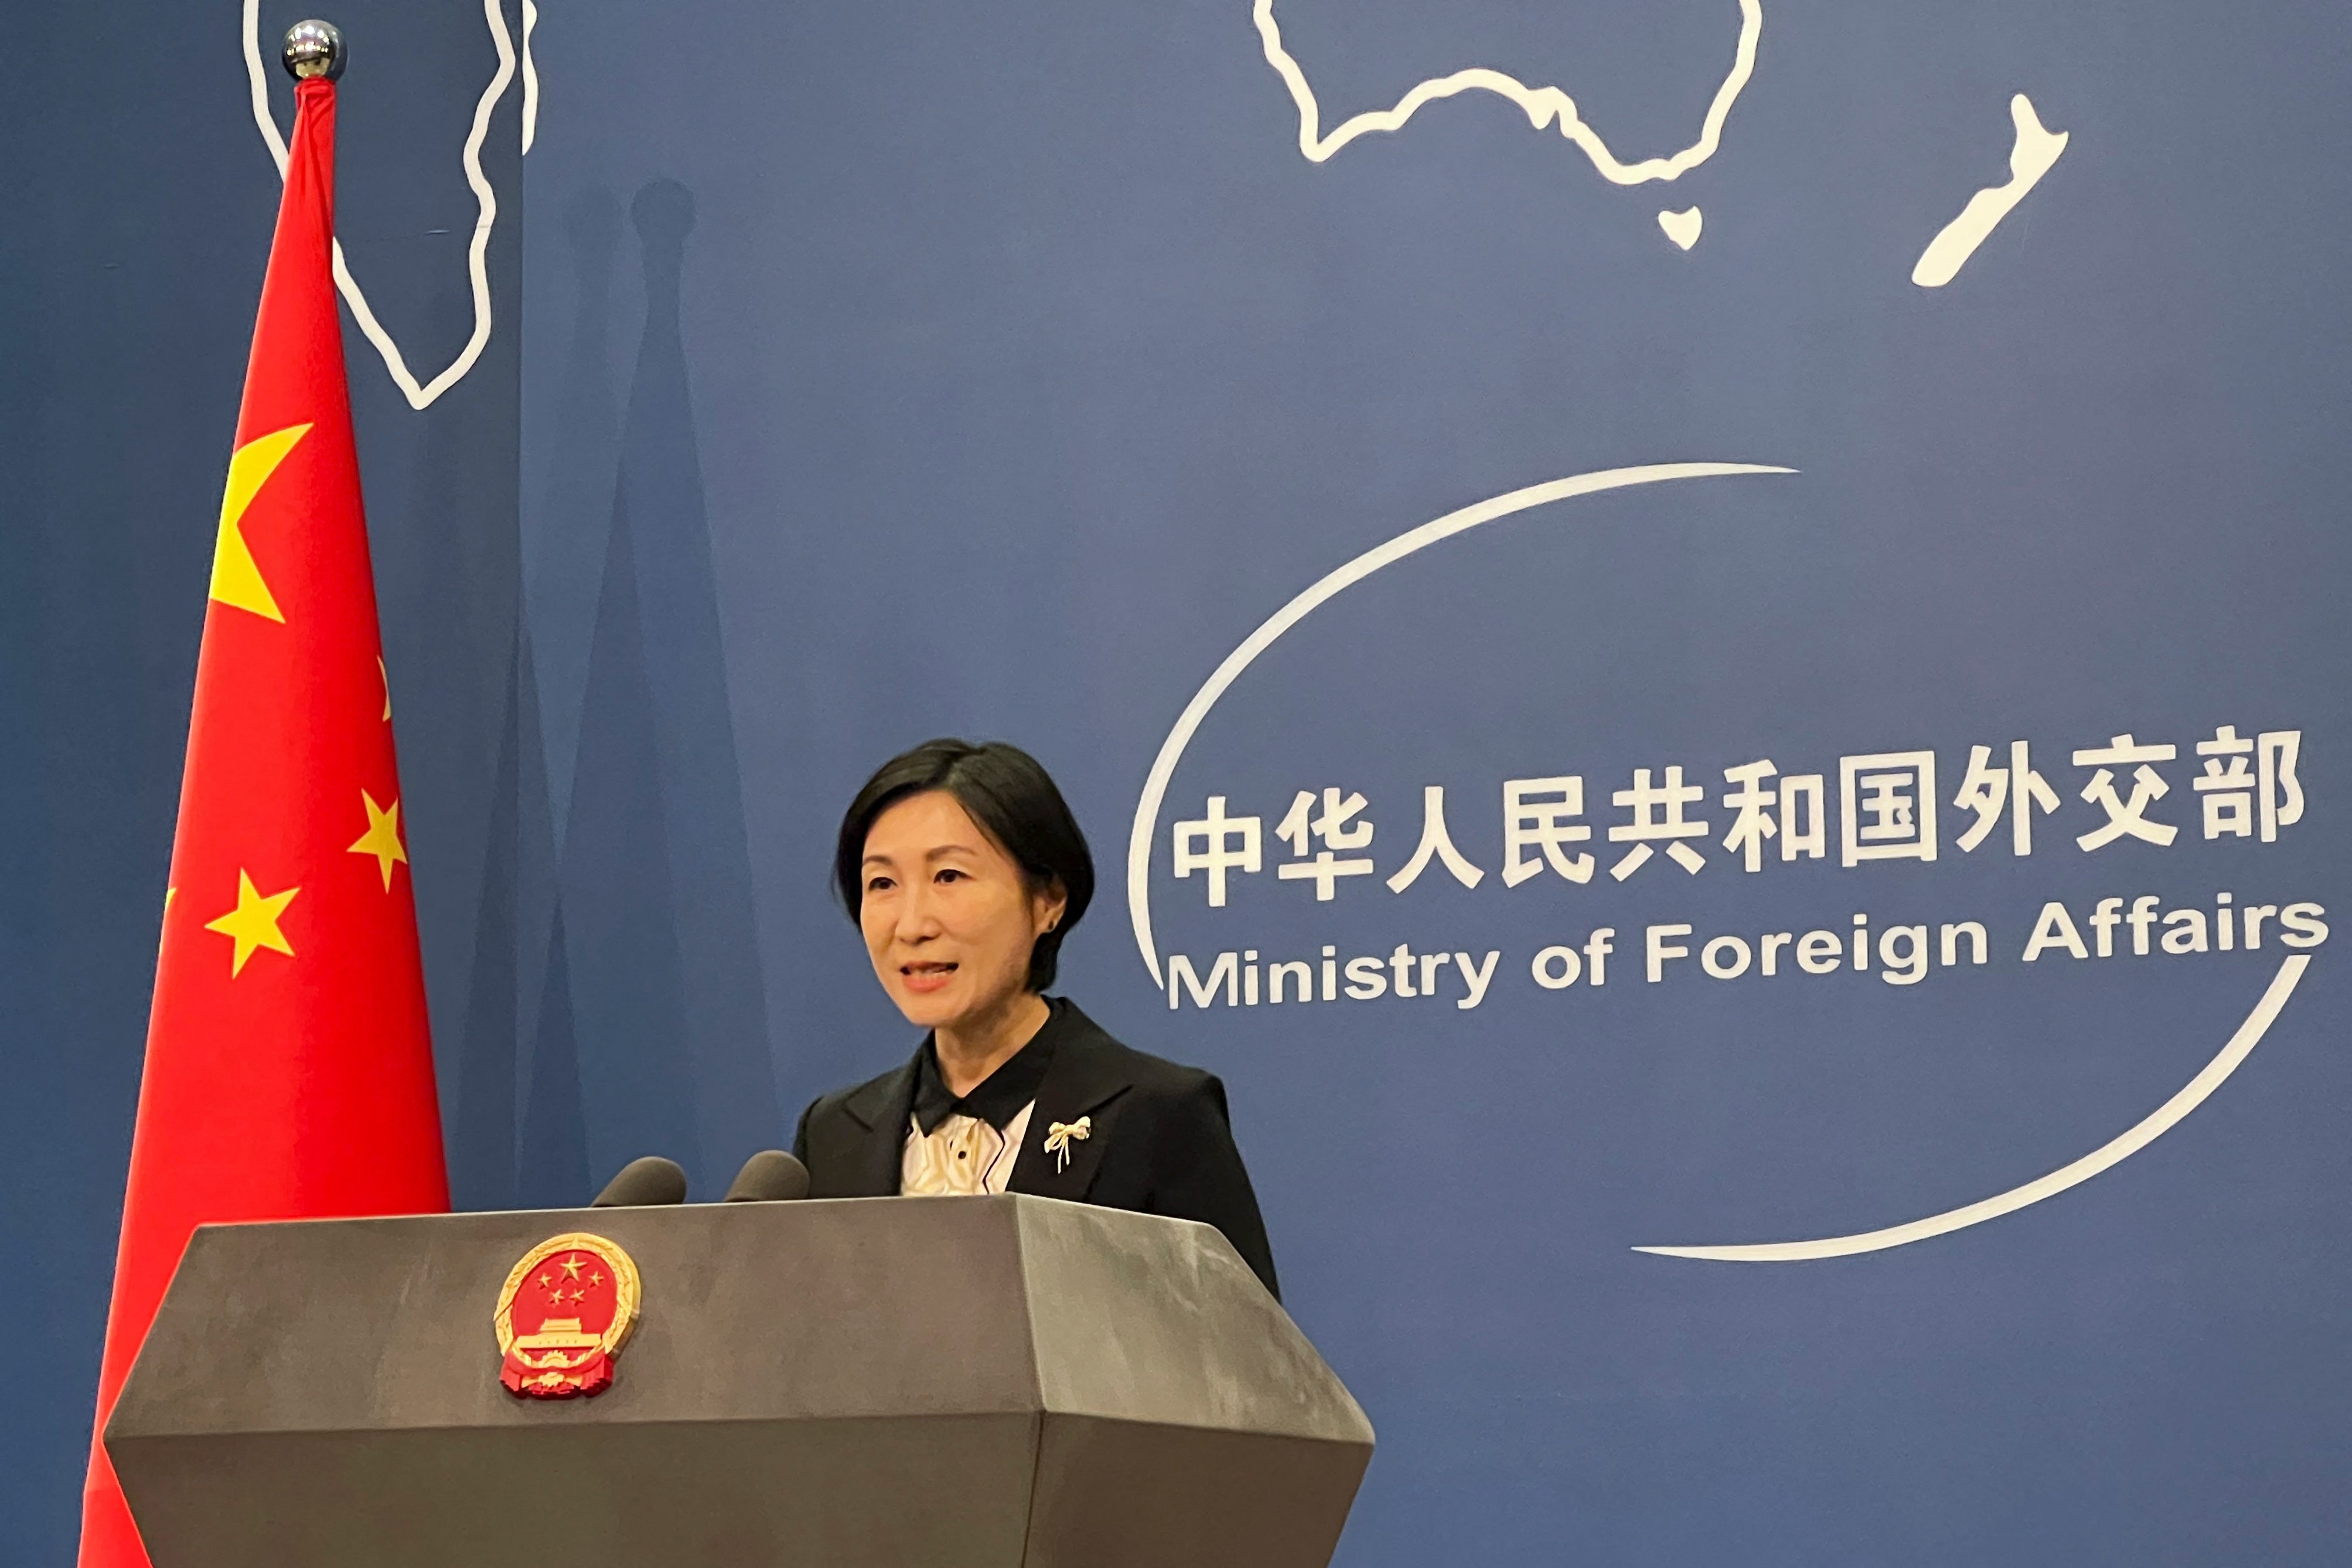 China blasts ‘unacceptable’ COVID-19 travel restrictions, claims political motivations for new rules